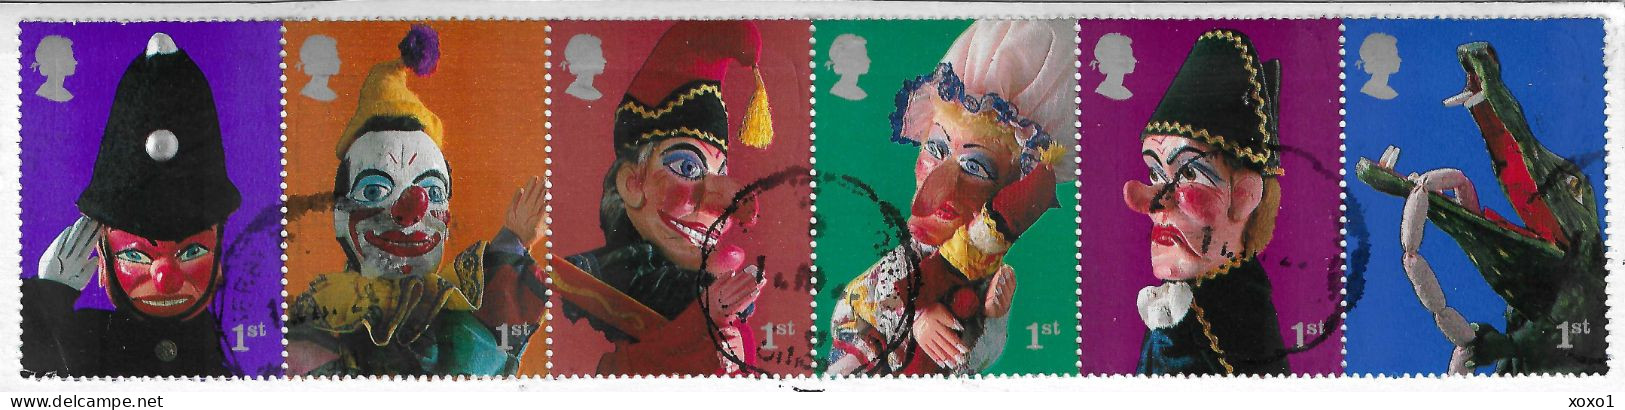 Great Britain 2001 MiNr. 1946 - 1951 Großbritannien Hand Puppet Theater: Punch And Judy Childhood Dolls 6v Used 7.50 € - Poppen